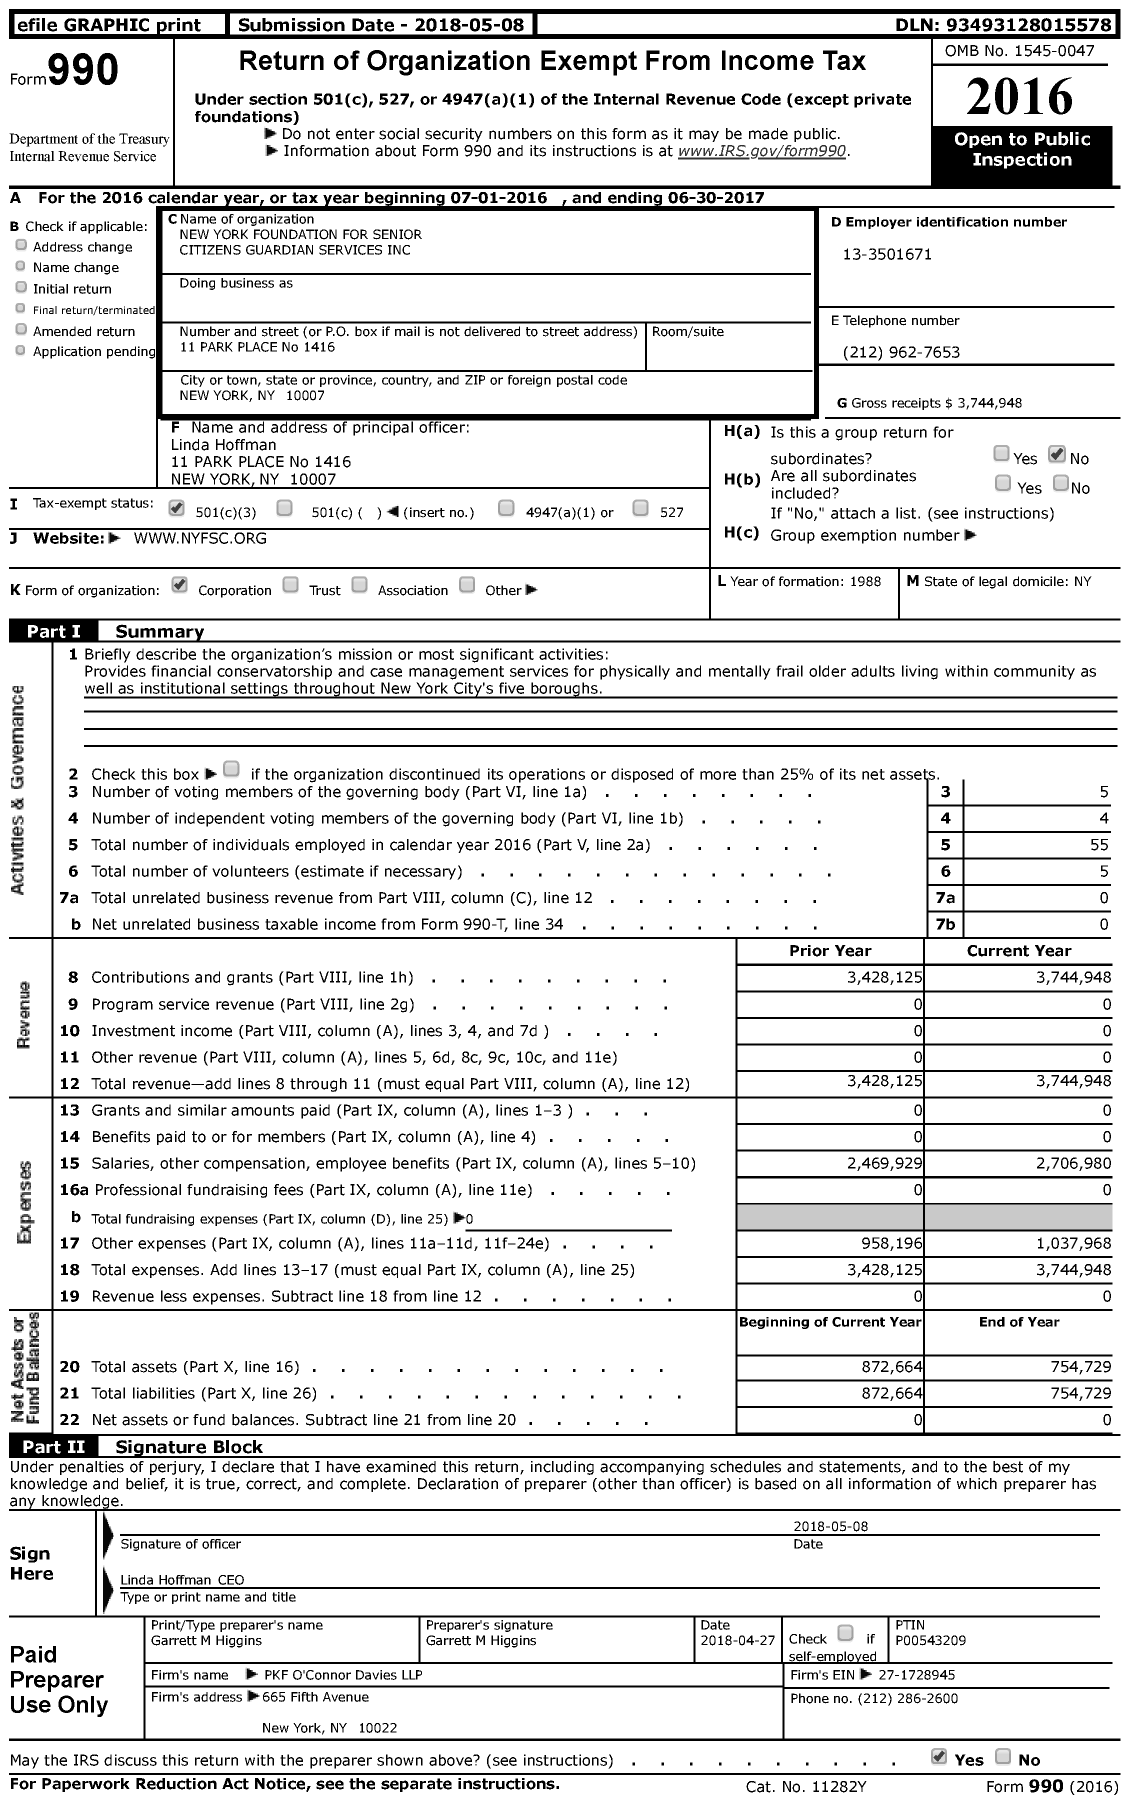 Image of first page of 2016 Form 990 for New York Foundation for Senior Citizens Guardian Services (NYFSC)